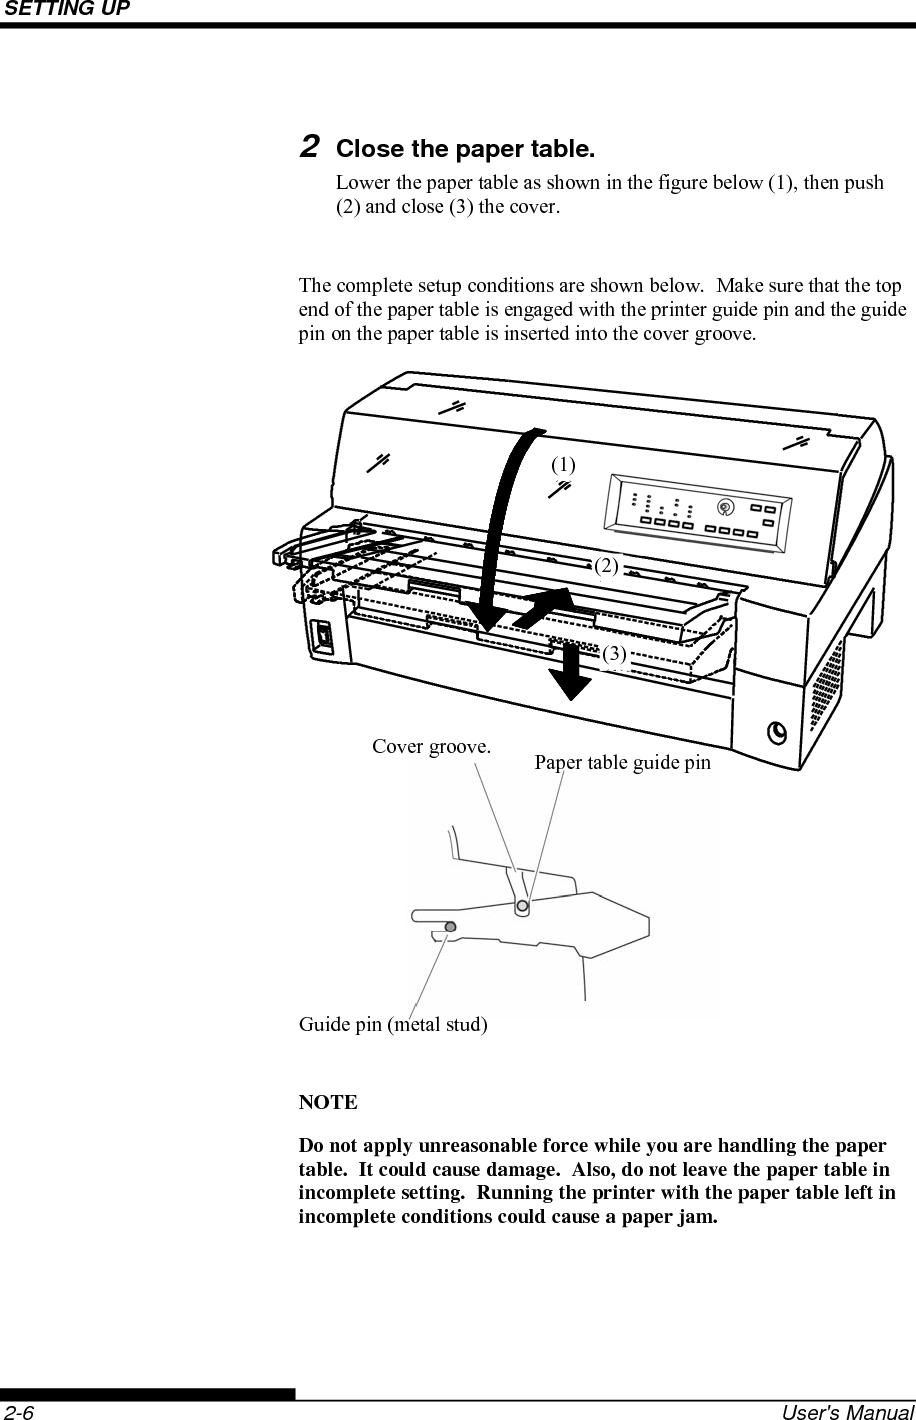 SETTING UP    2-6  User&apos;s Manual  2 Close the paper table. Lower the paper table as shown in the figure below (1), then push (2) and close (3) the cover.  The complete setup conditions are shown below.  Make sure that the top end of the paper table is engaged with the printer guide pin and the guide pin on the paper table is inserted into the cover groove.                  NOTE Do not apply unreasonable force while you are handling the paper table.  It could cause damage.  Also, do not leave the paper table in incomplete setting.  Running the printer with the paper table left in incomplete conditions could cause a paper jam.  Cover groove.  Paper table guide pin Guide pin (metal stud) (3)(1)(2)(2)(1)(3)